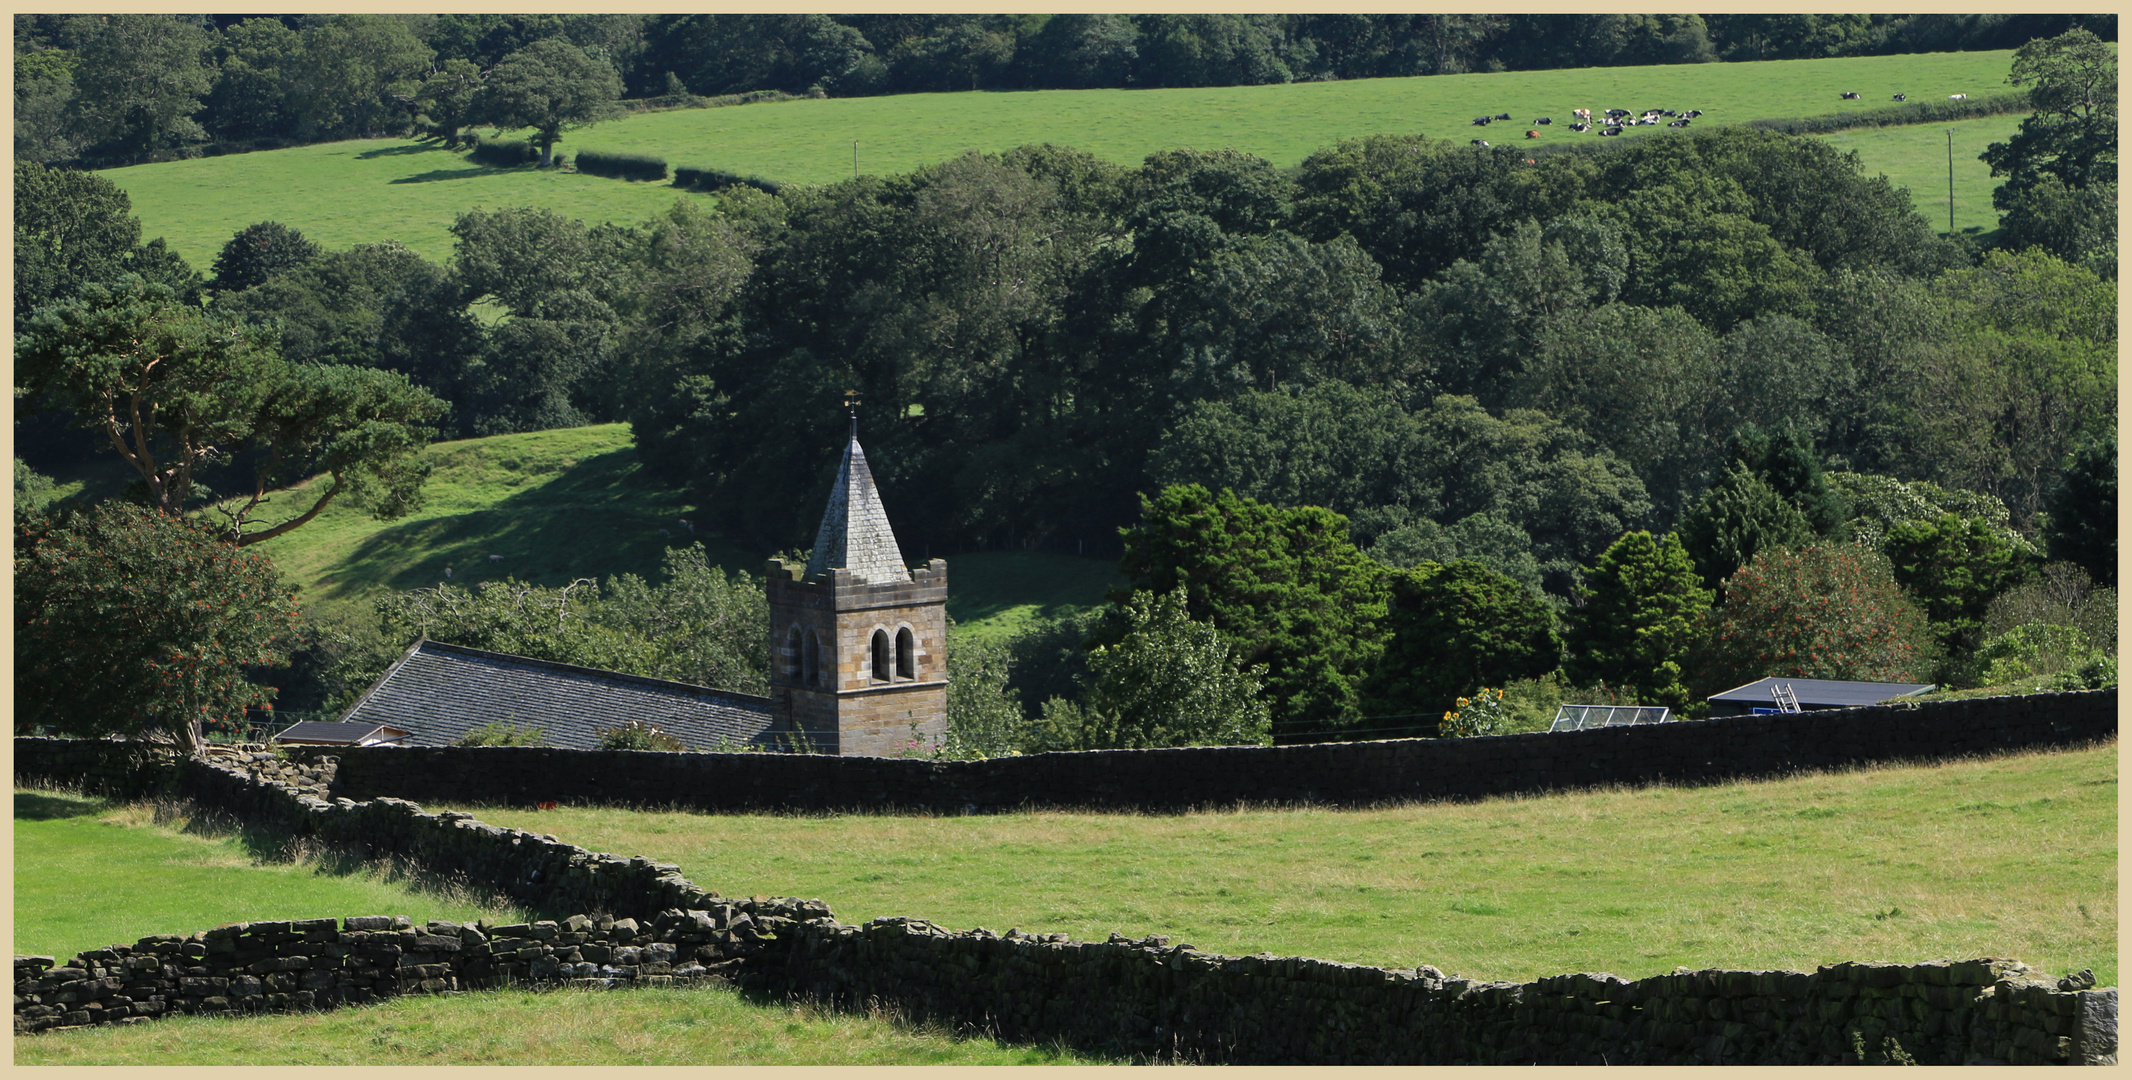 the church in Glaisdale